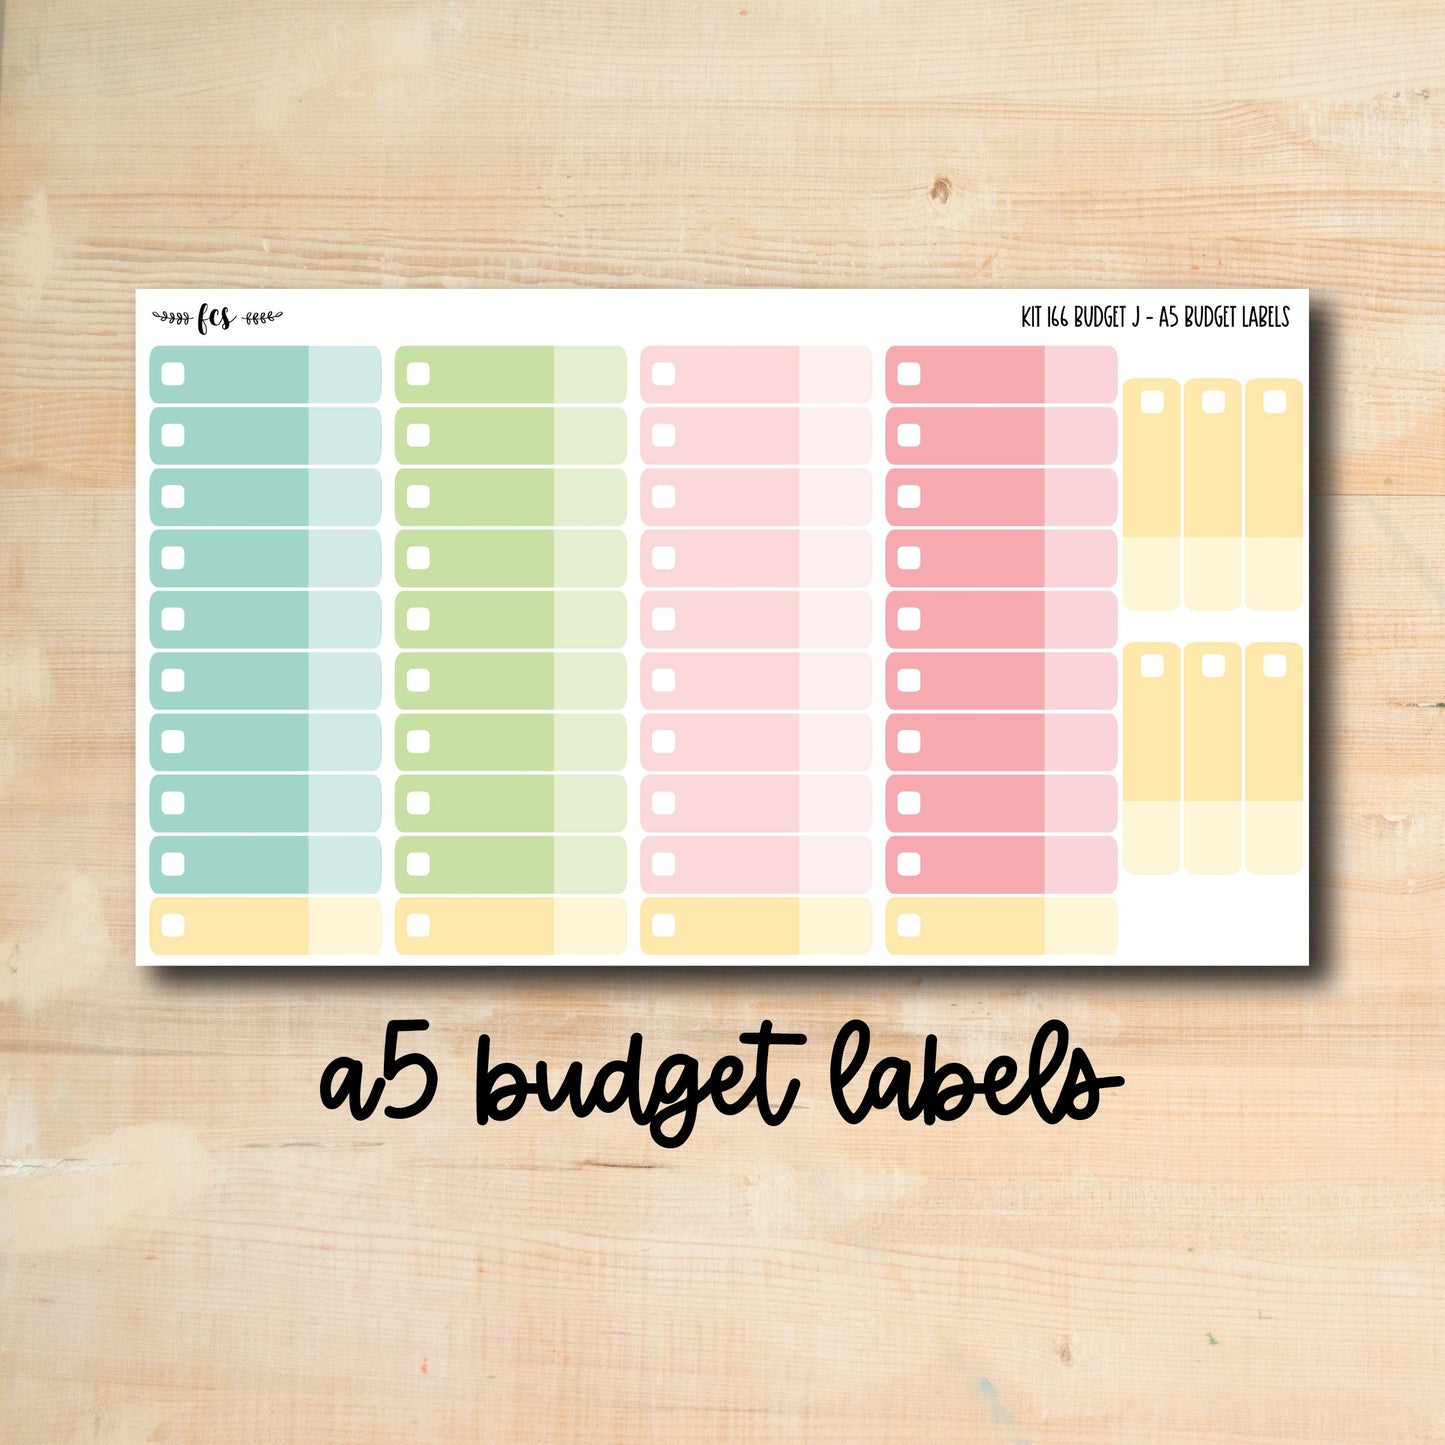 BUDGET-166 || SUNNY SKIES A5 budget labels